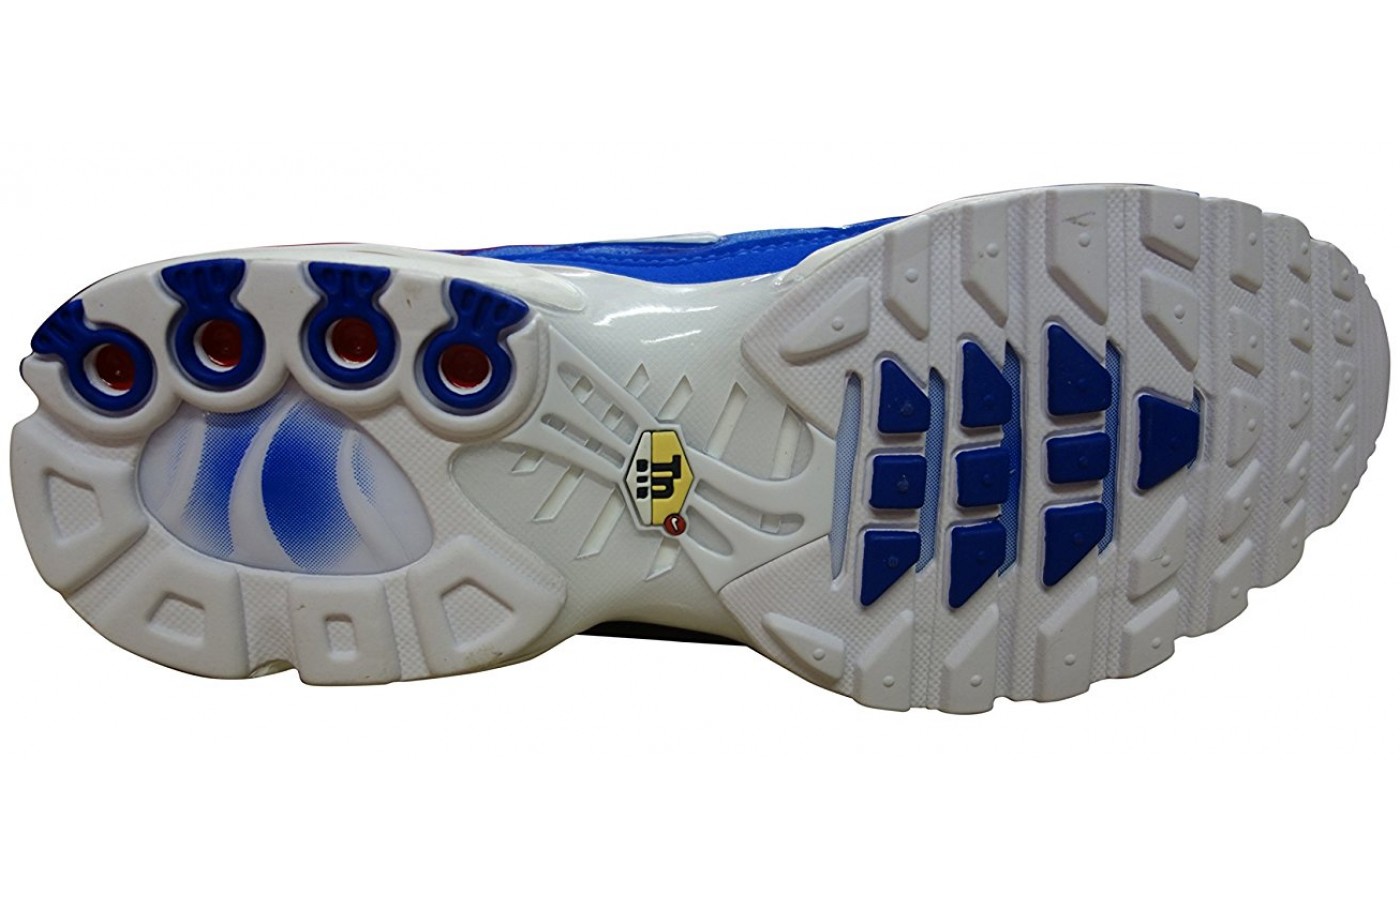 A bottom view of the Nike Air Max Plus shoe